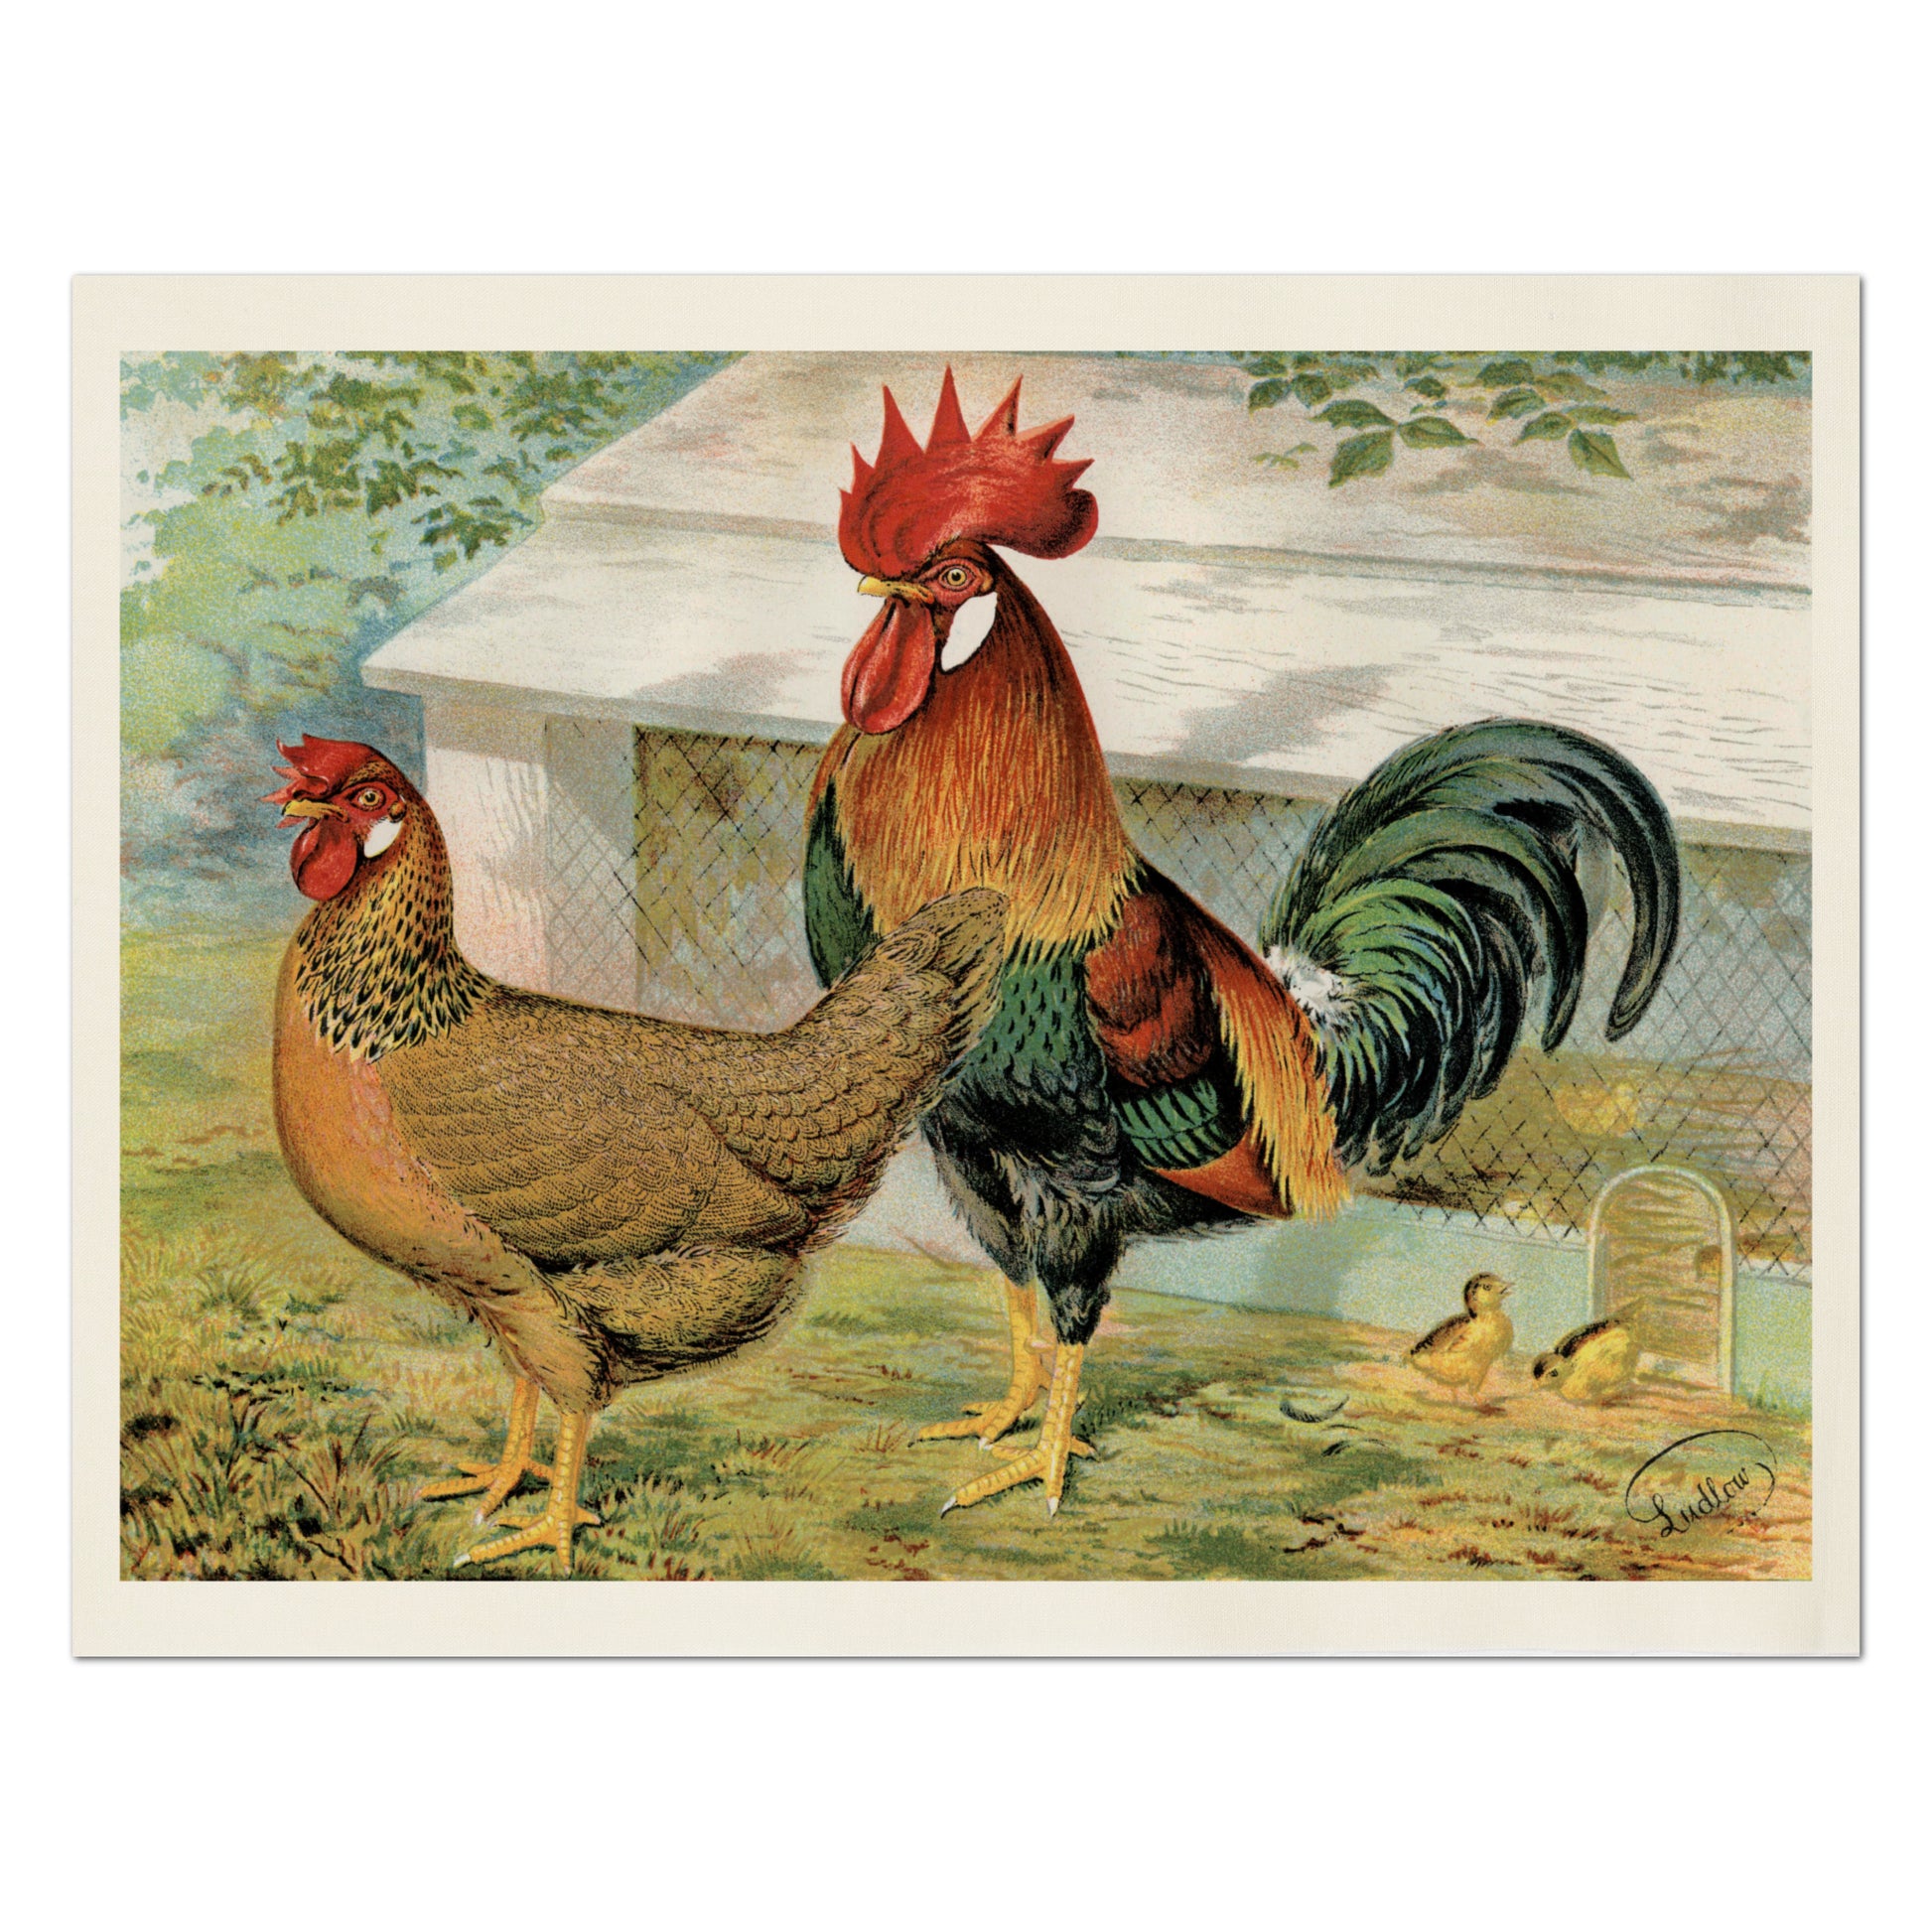 Rooster Fabric, Chicken, Farm, Farmhouse, Home Decor, Quilt, Quilting, Sewing and Crafts